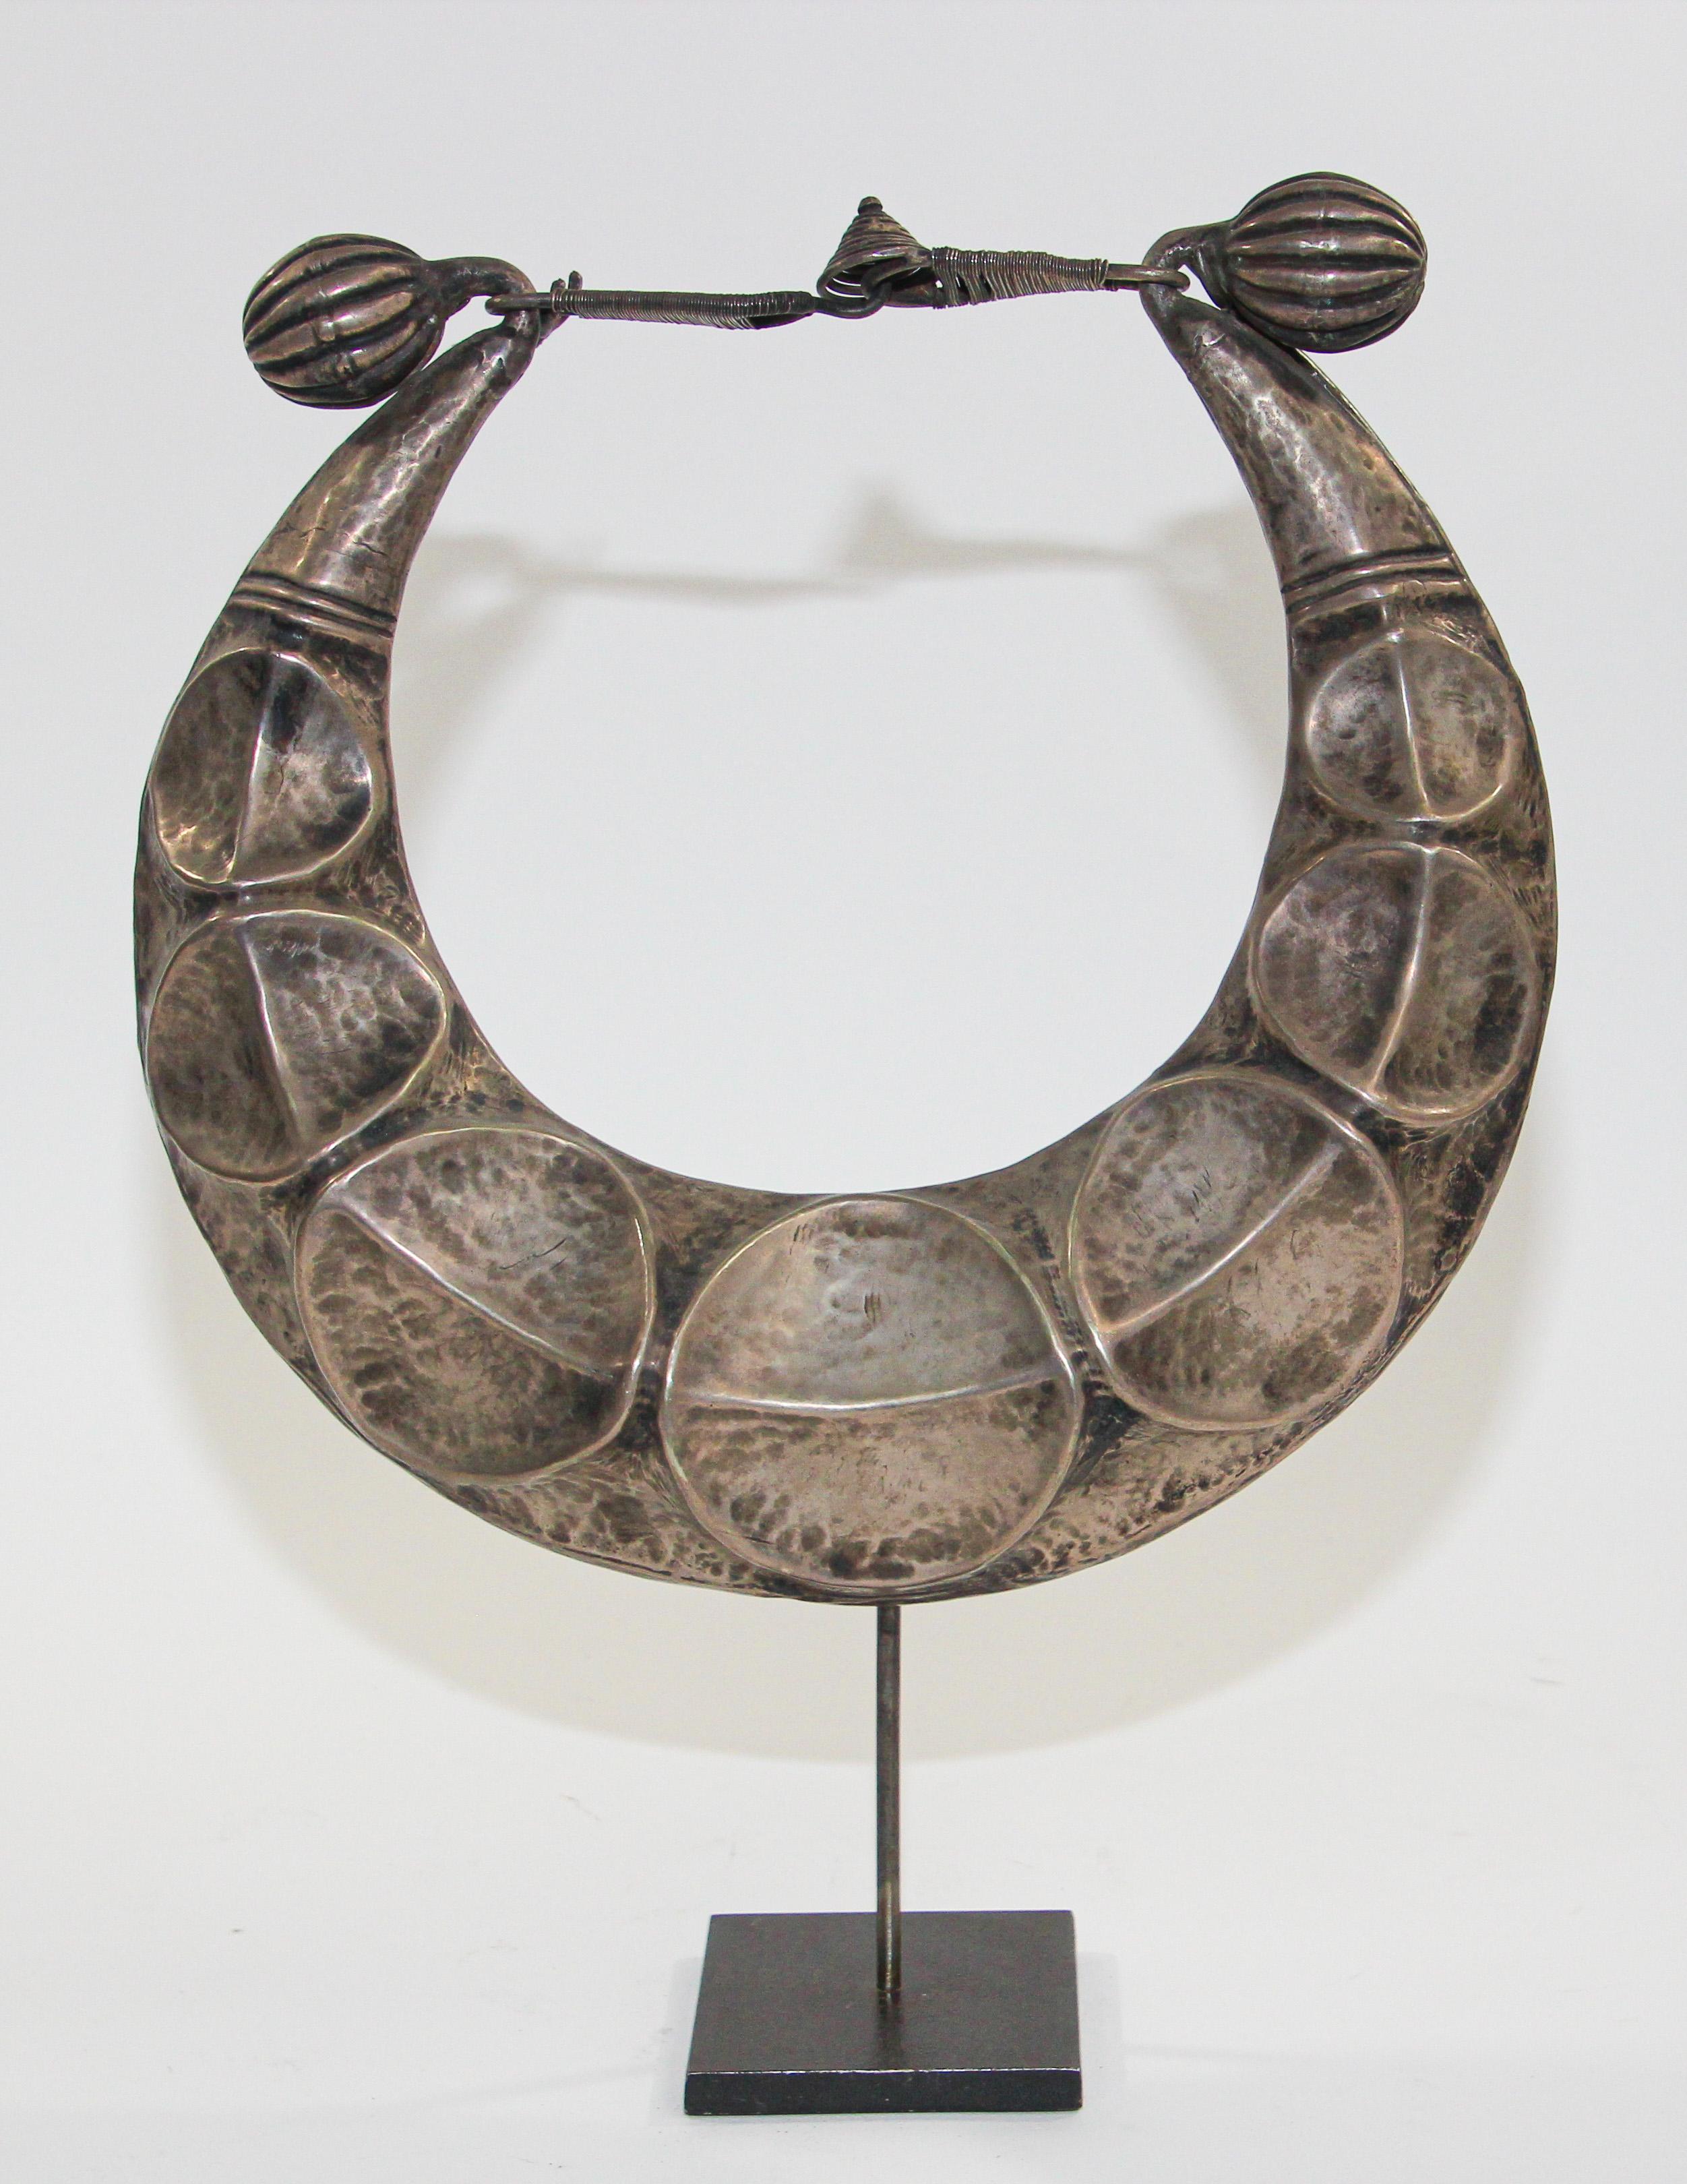 Vintage Miao Hmong ceremonial mix silver collar necklace on custom stand, Laos.
This beautiful Miao Hmong ceremonial mix silver Necklace would be a wonderful addition to your collection, home or to simply treasure for yourself.
Comes with a stand.